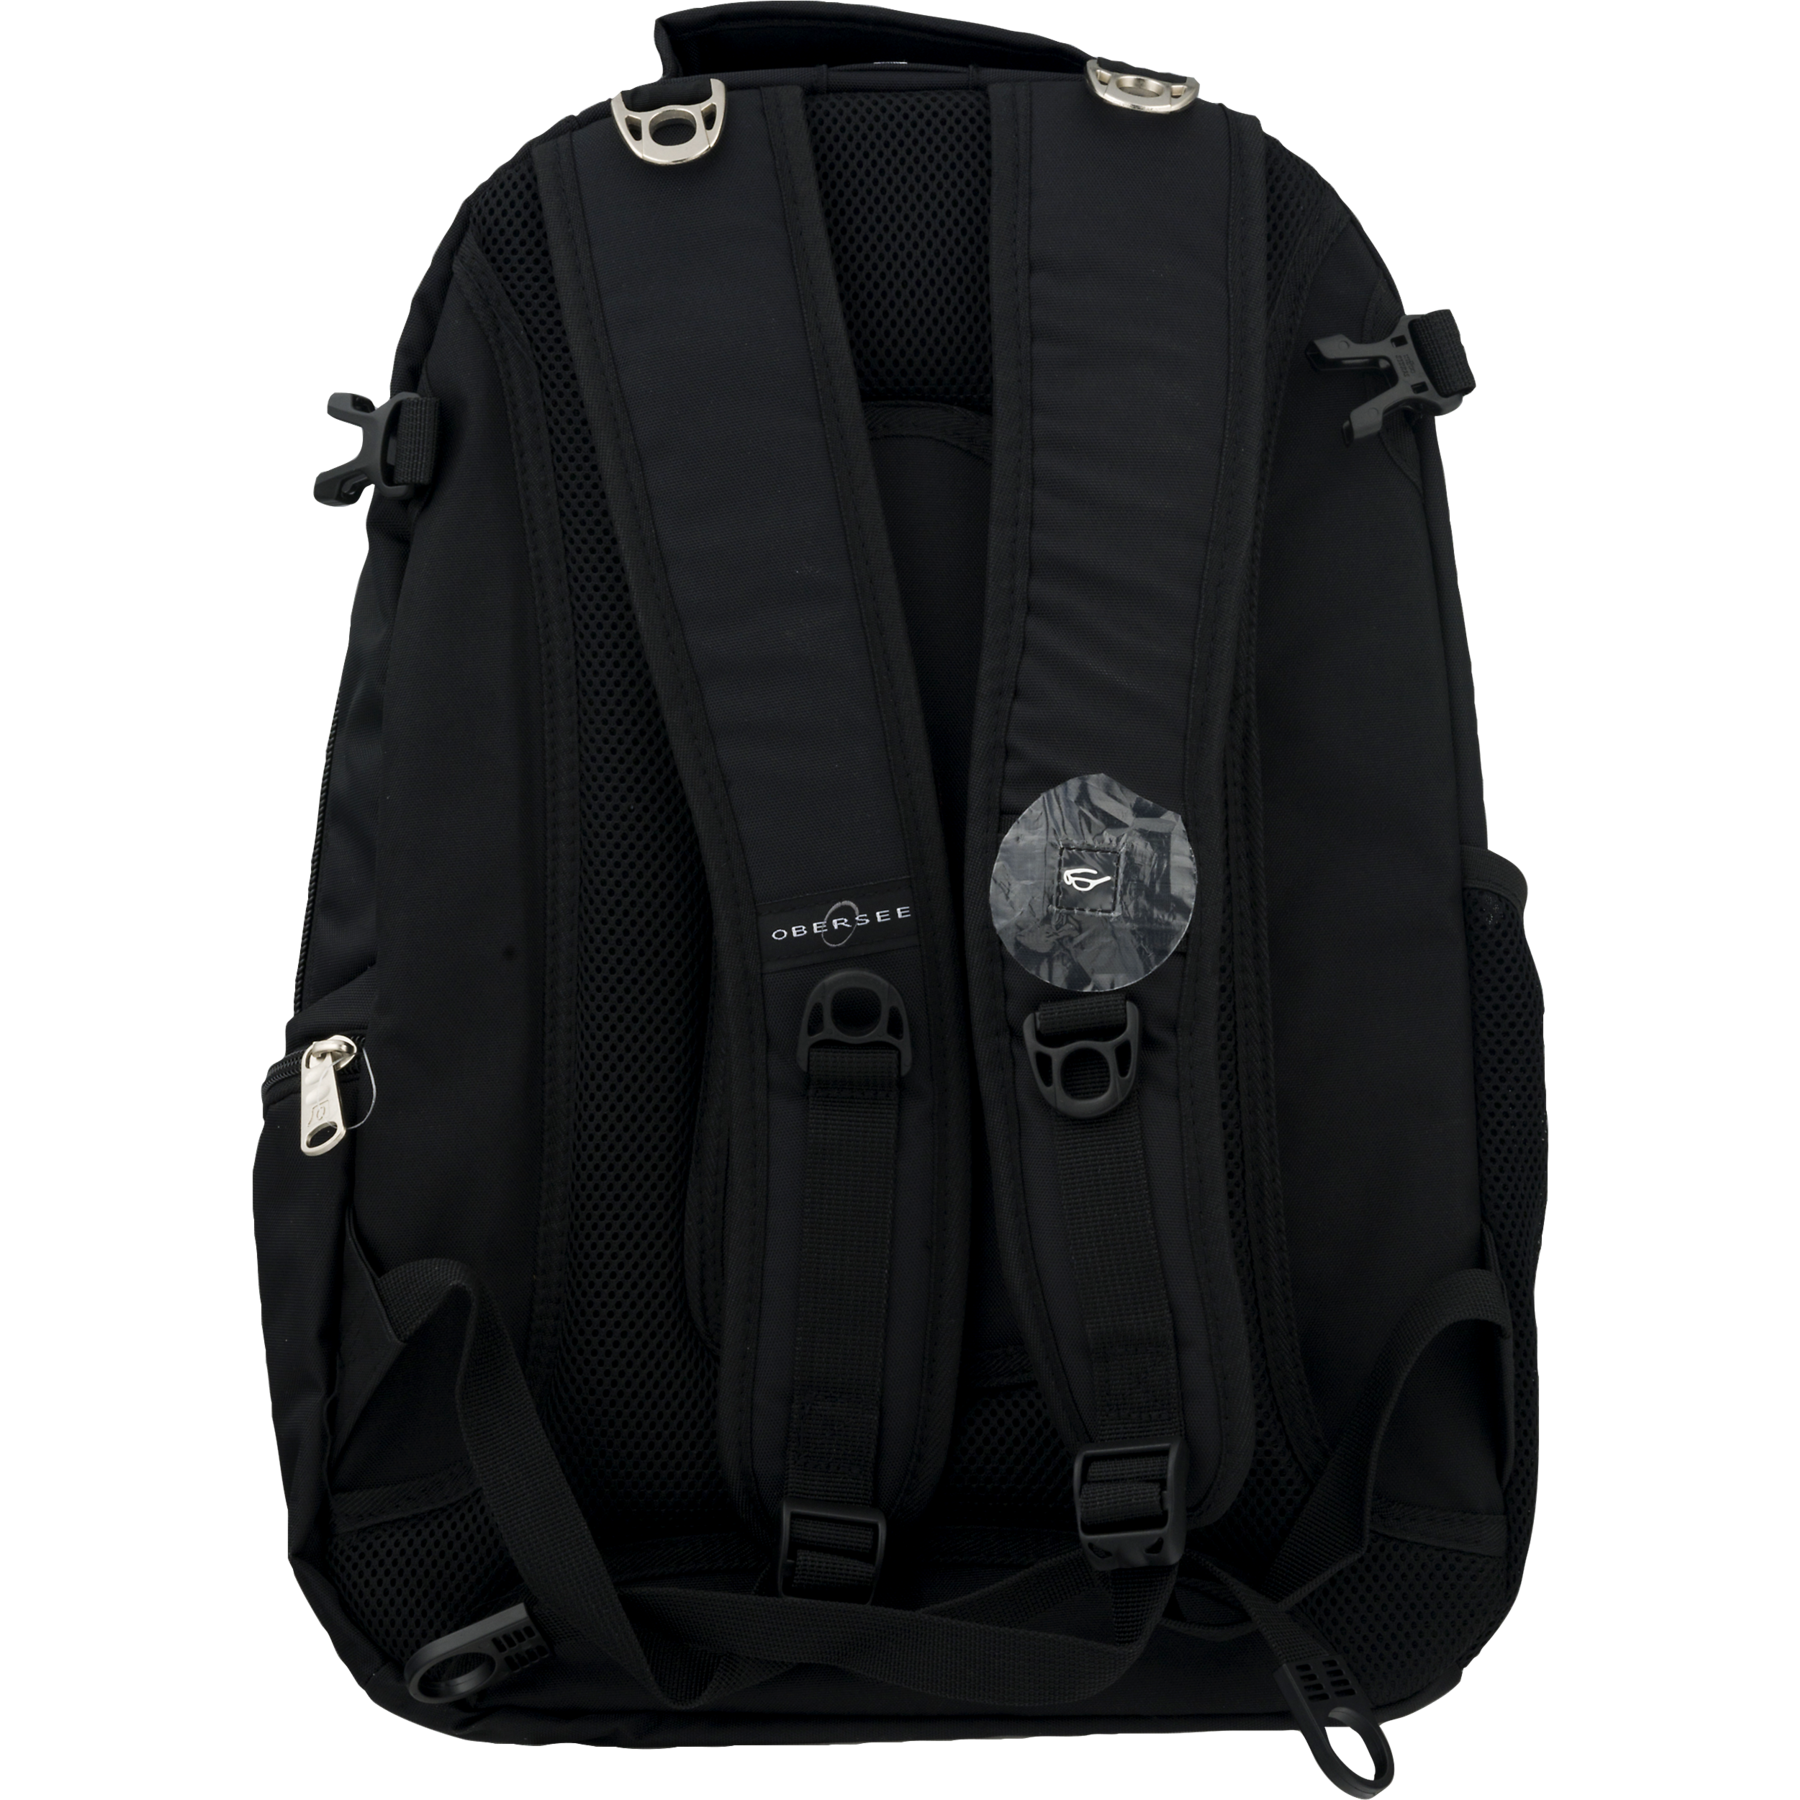 Obersee BERN Diaper Backpack with Changing Mat, Shoulder Baby Bag, Clip to Stroller | Black - image 5 of 5